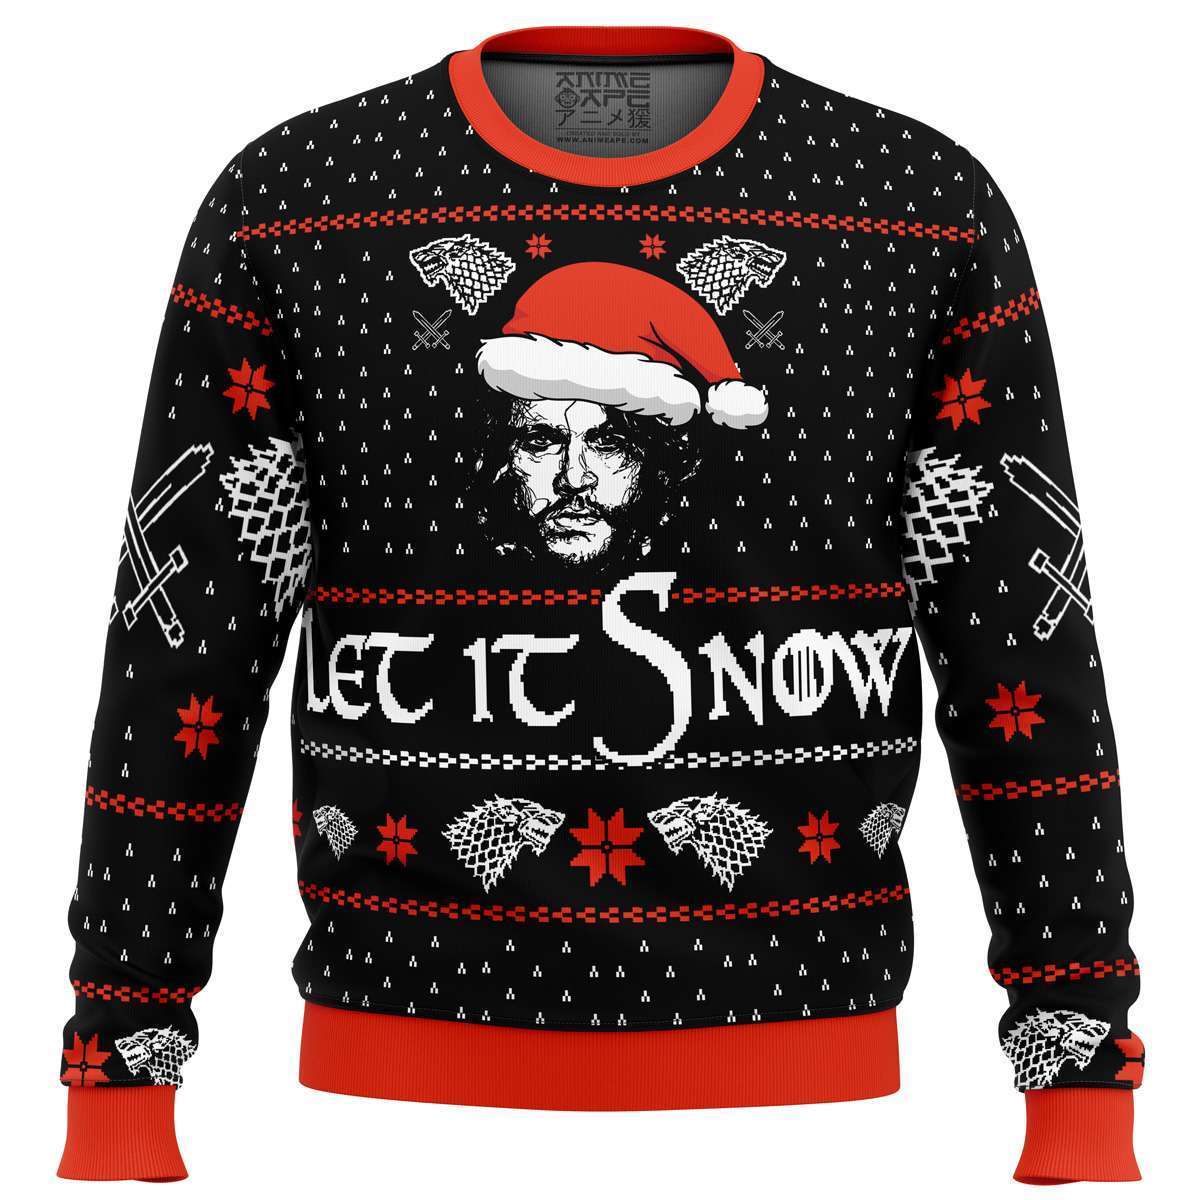 Let it Snow Jon Game of Thrones Ugly Christmas Sweater